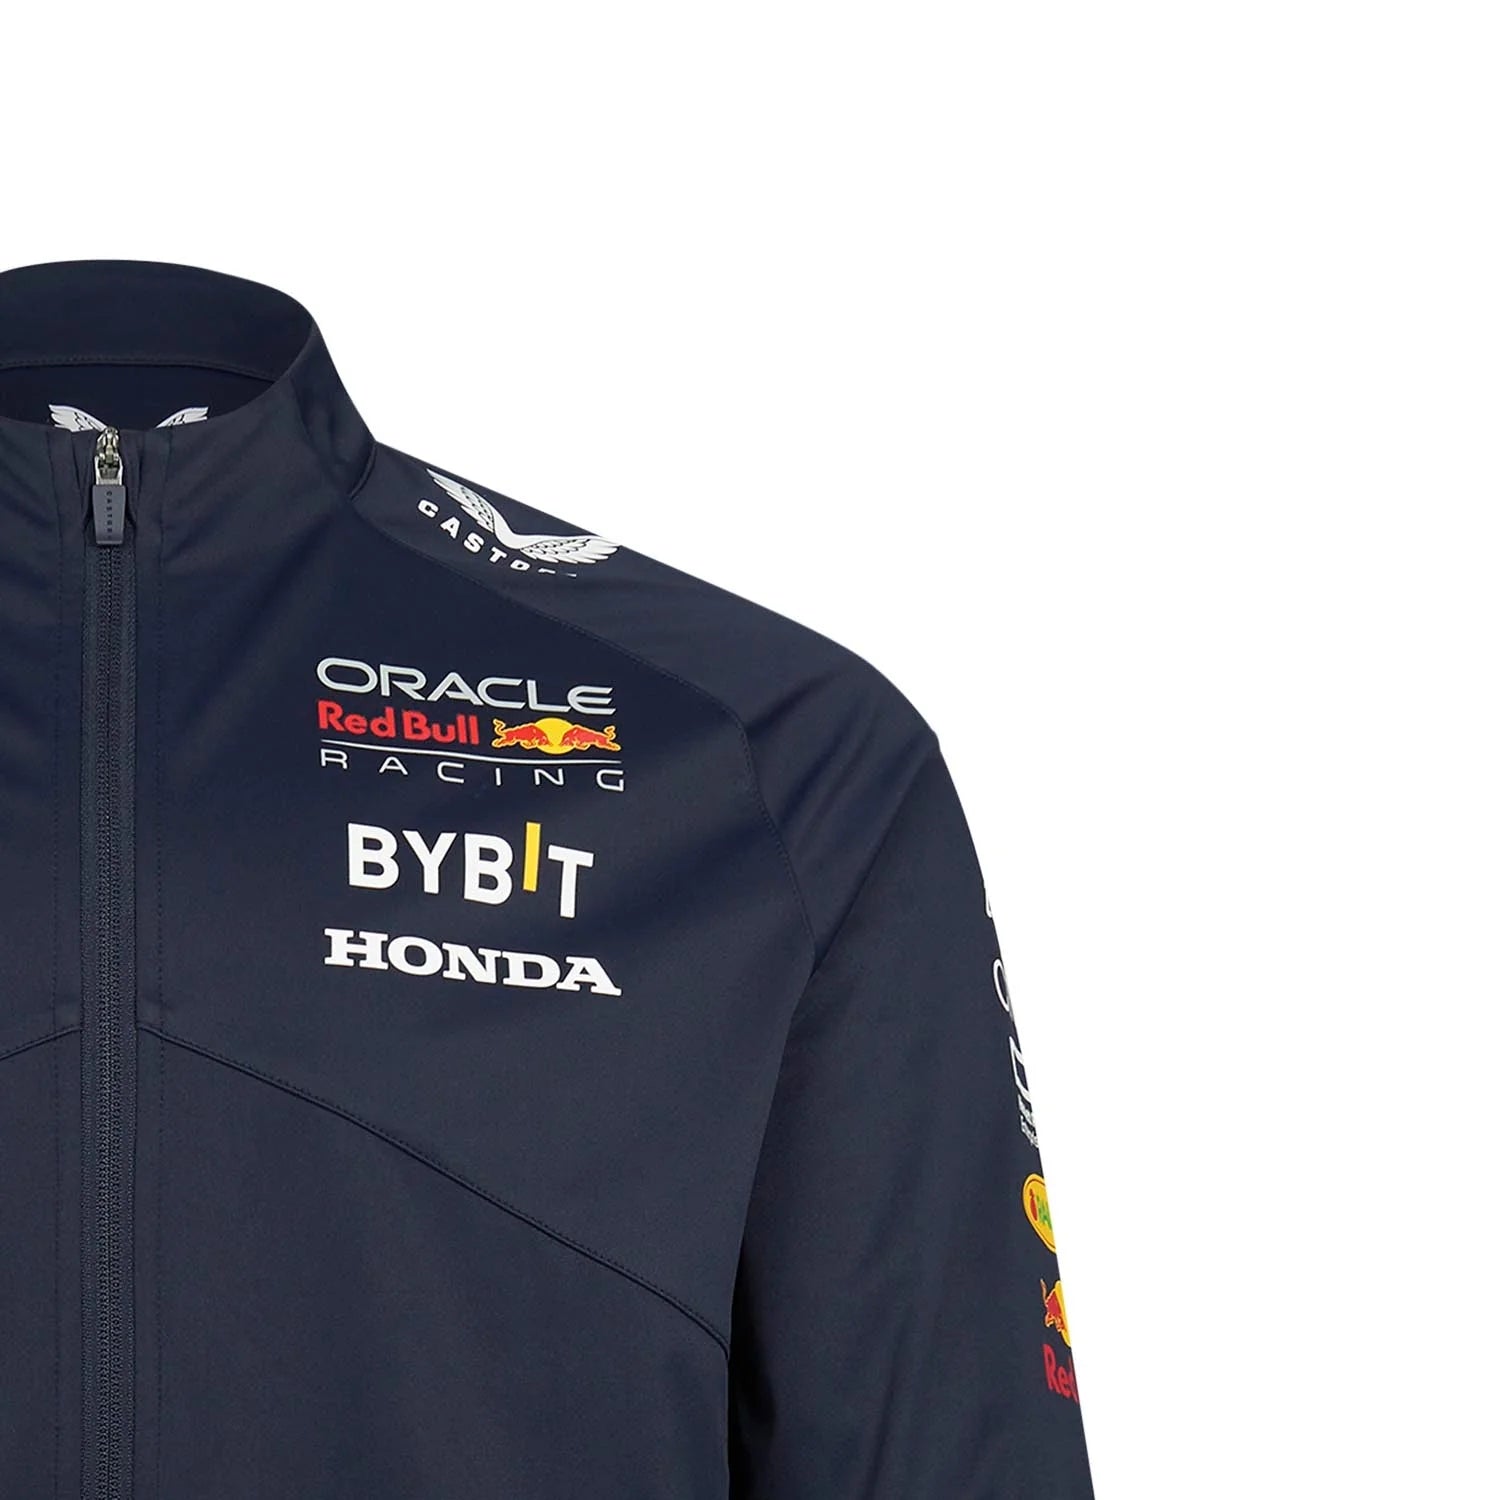 Castore Softshell Jacket | Red Bull Racing Jacket | Formula 1 Driver Long Sleeves Jacket | F1 Clothing | For Men | Best Wearing in Bahrain | Halabh.com